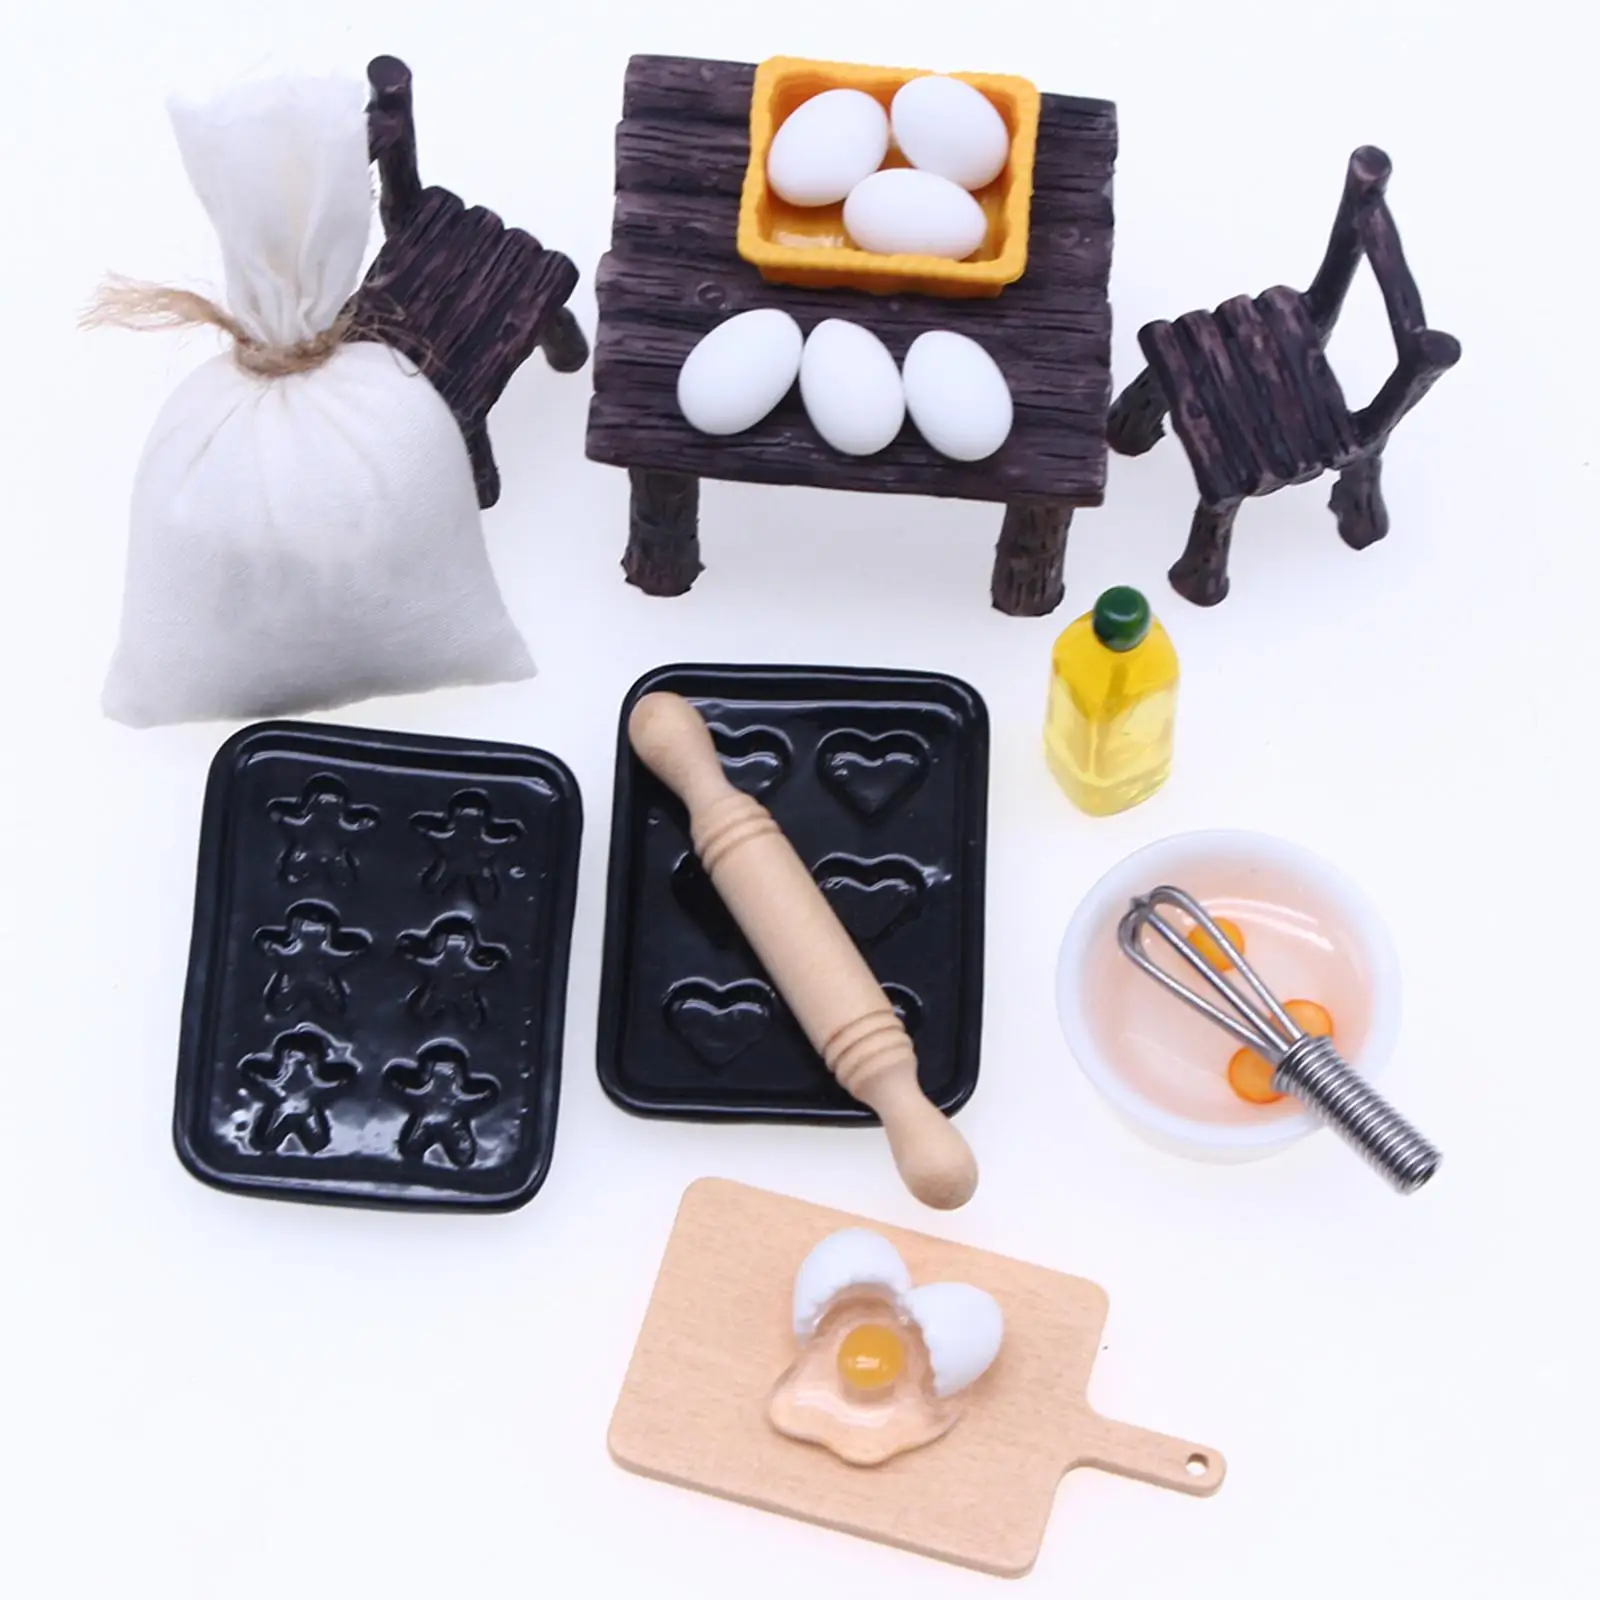 1:12 Dollhouse Cooking Miniature Desk and Chair Set Rolling Pin Tray Egg Bowl Olive Oil Pretend Play Toy Set Decoration Gift